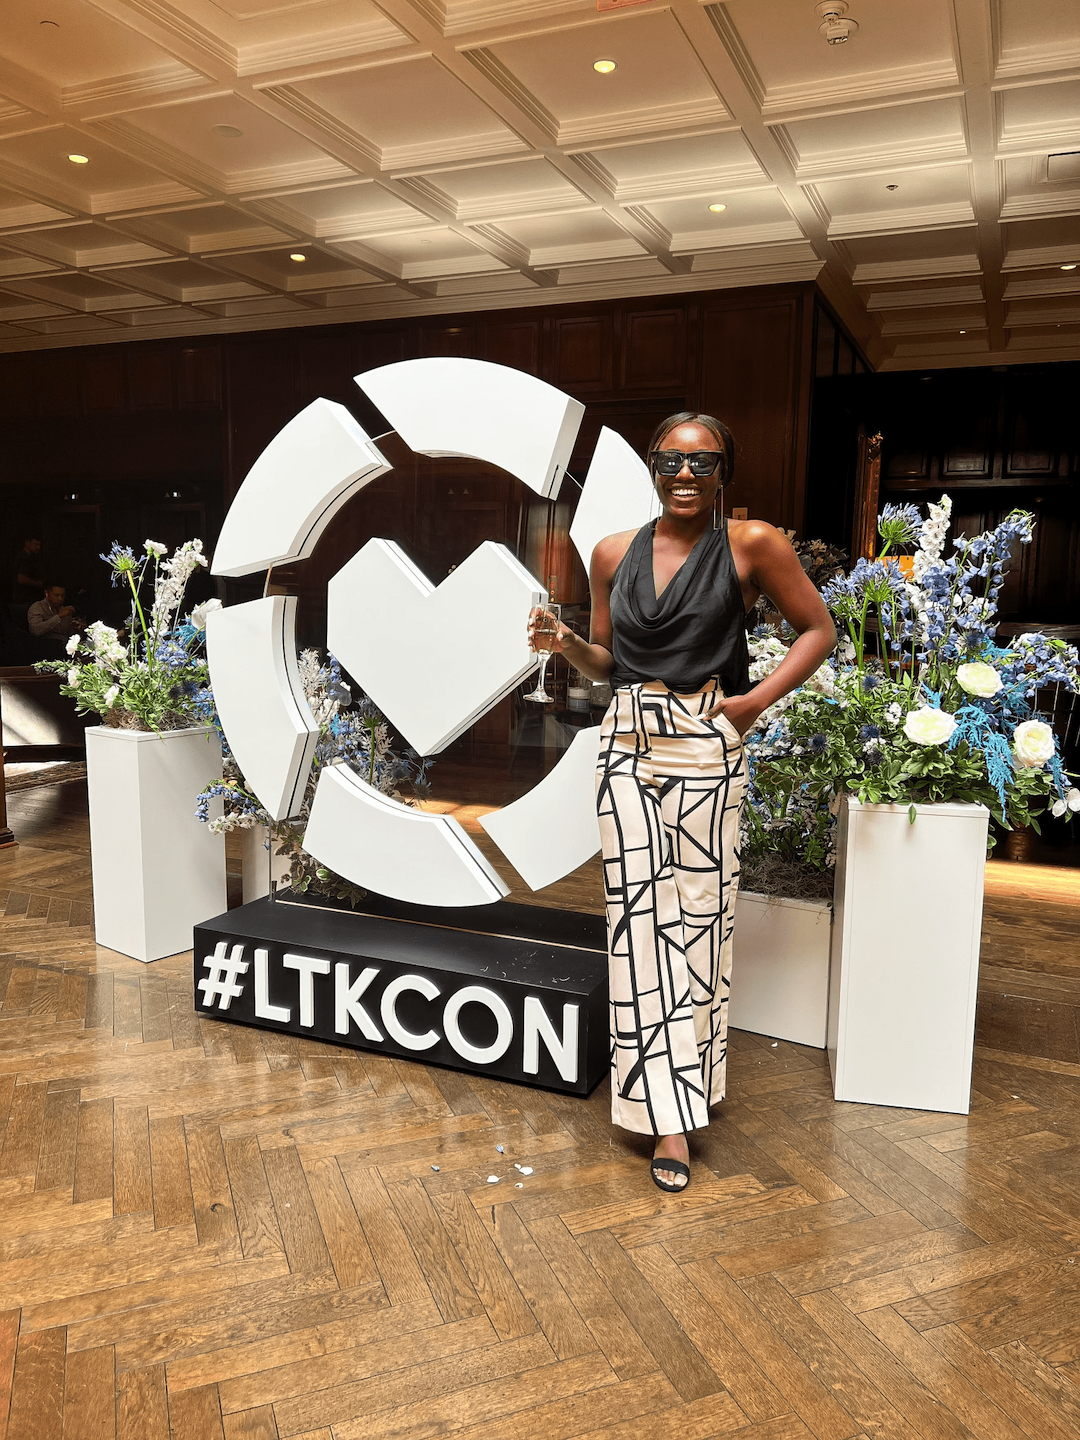 goodtomicha in front of the #LTKCON sign at LTK Conference